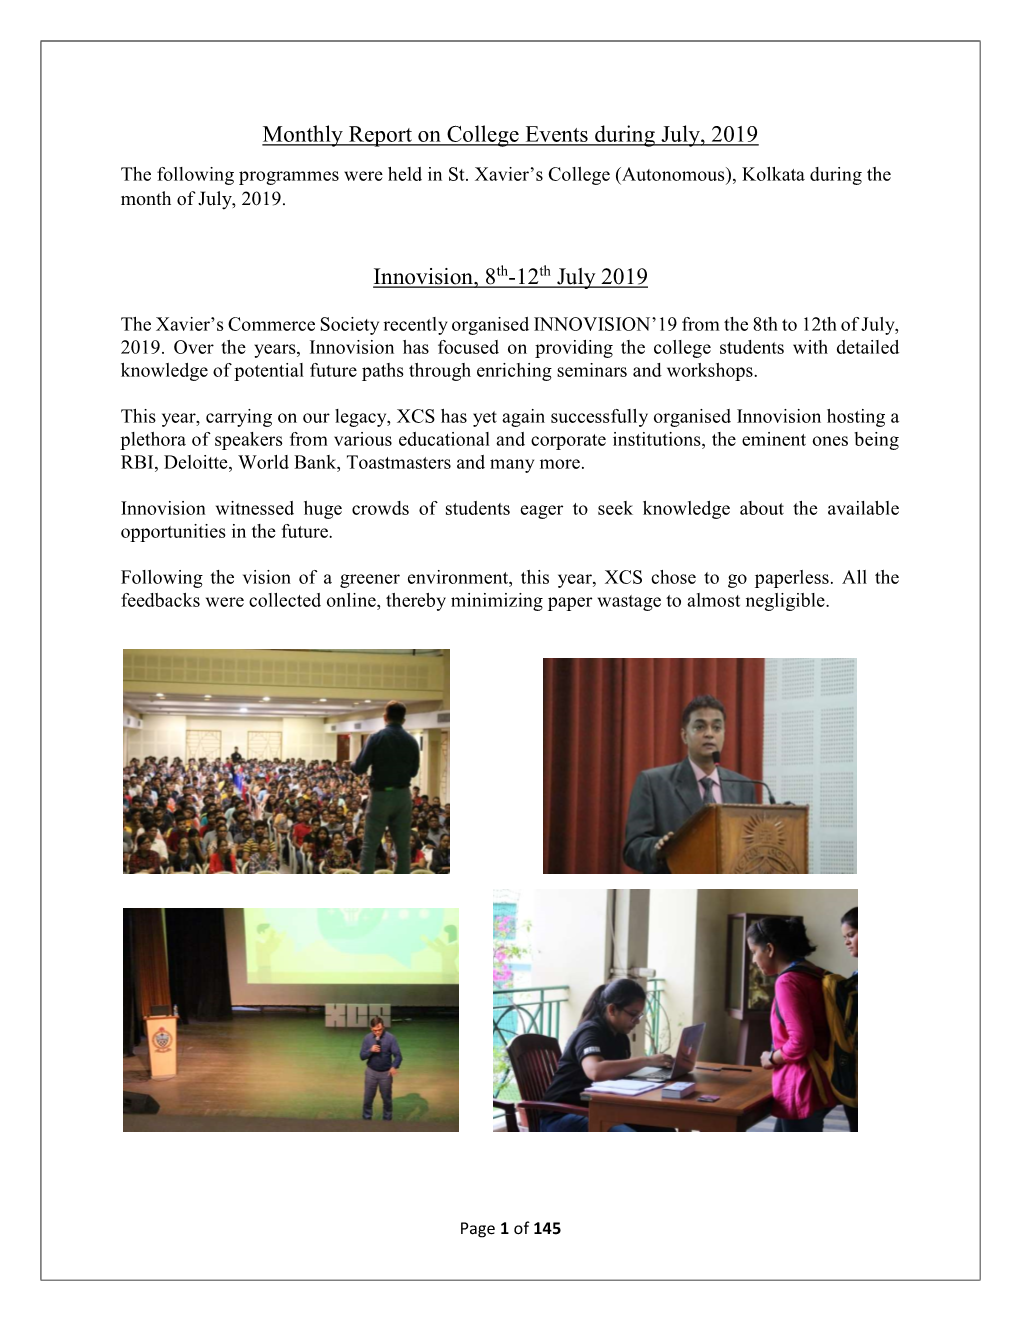 Monthly Report on College Events During July, 2019 Innovision, 8Th